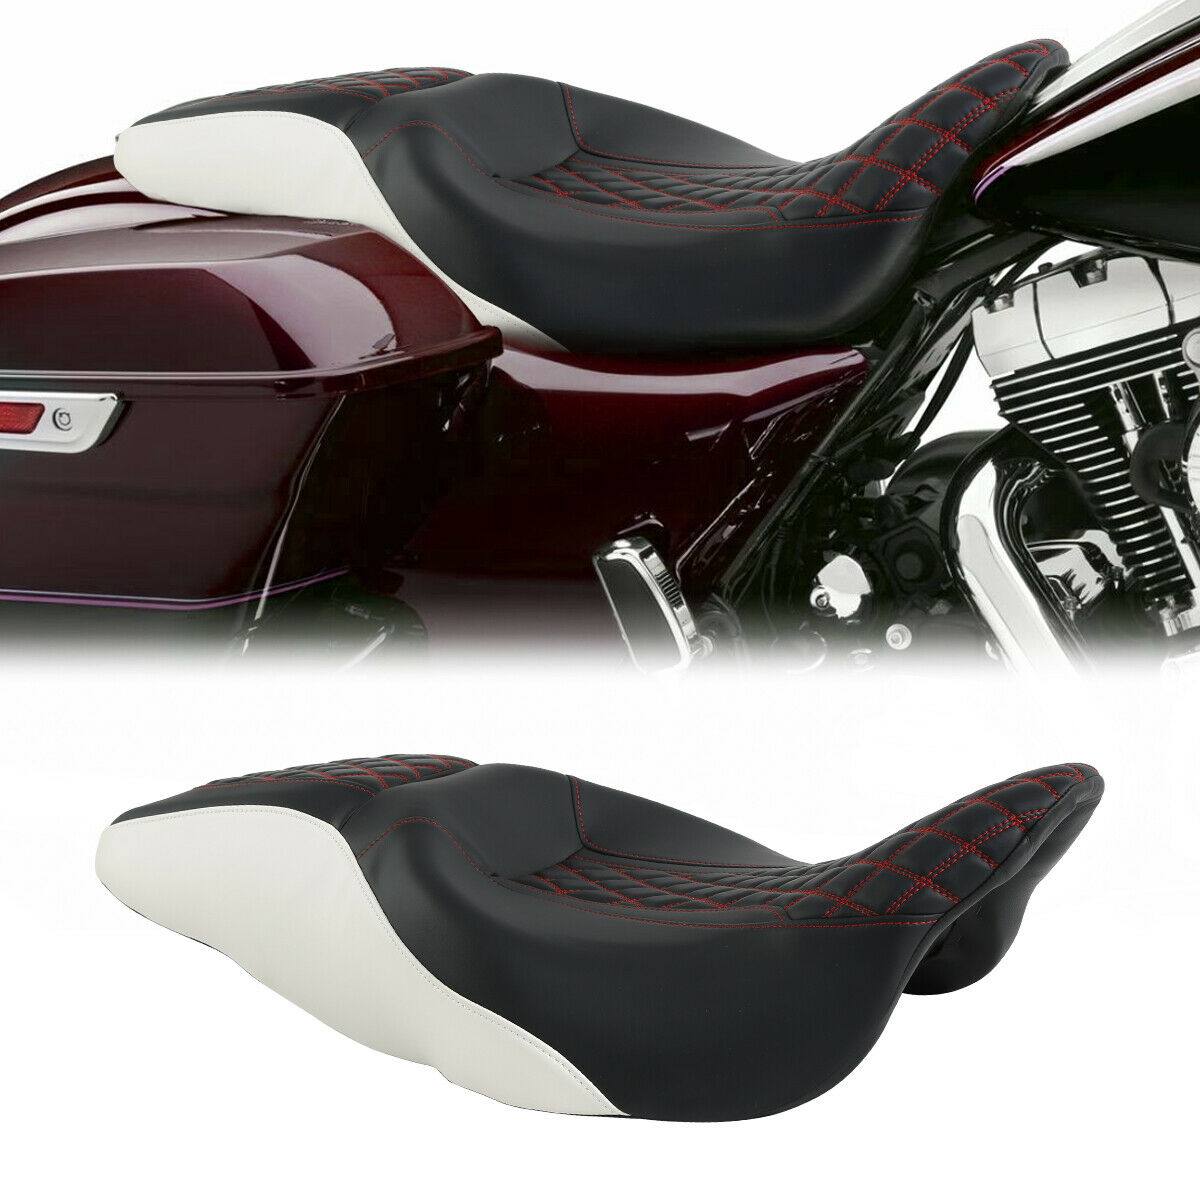 Rider Passenger Seat Fit For Harley Touring Street Electra Tri Glide 2009-2022 - Moto Life Products